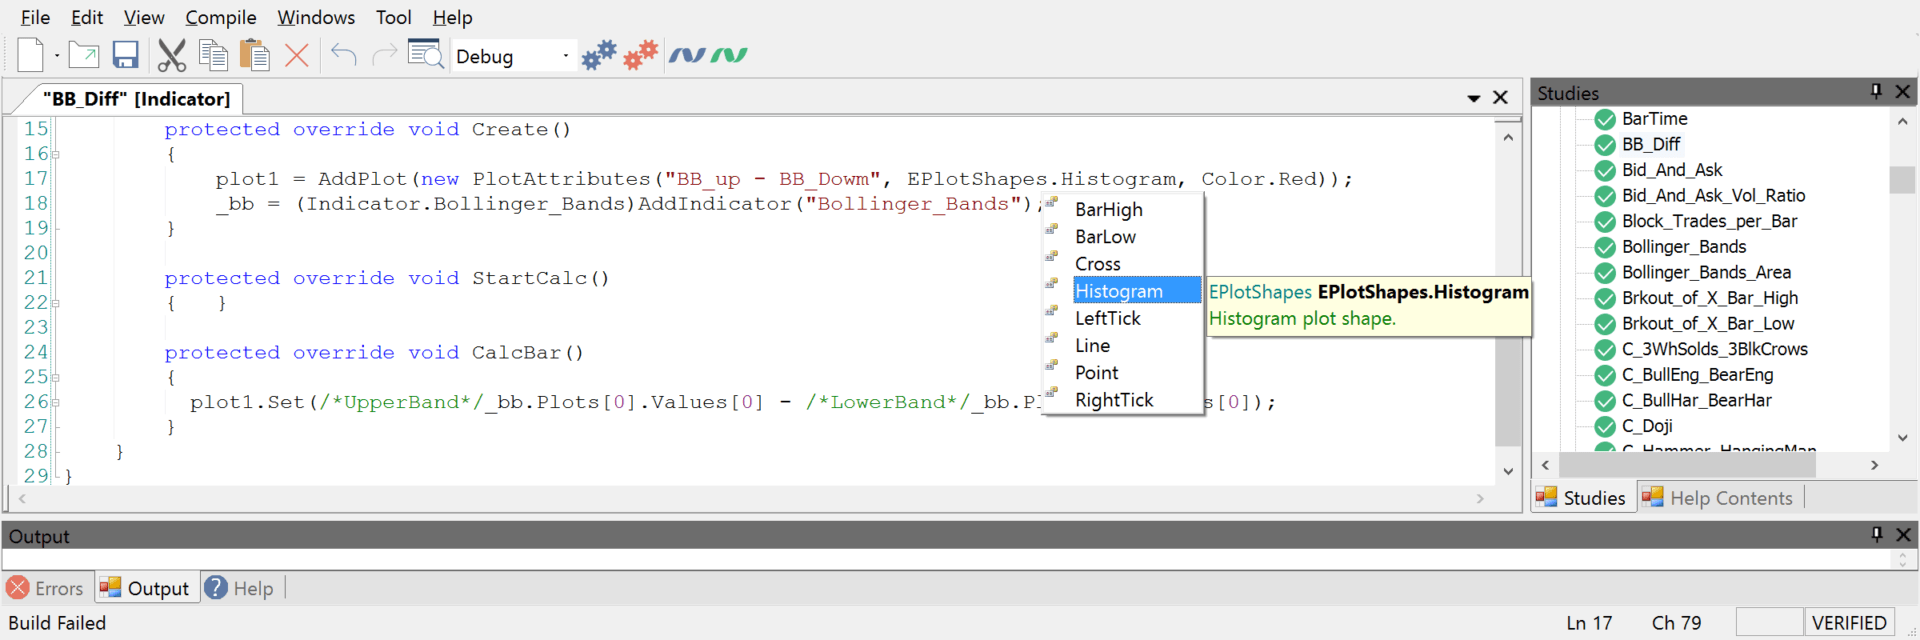 Develop_complex_strategies_in_C_and_VB_NET